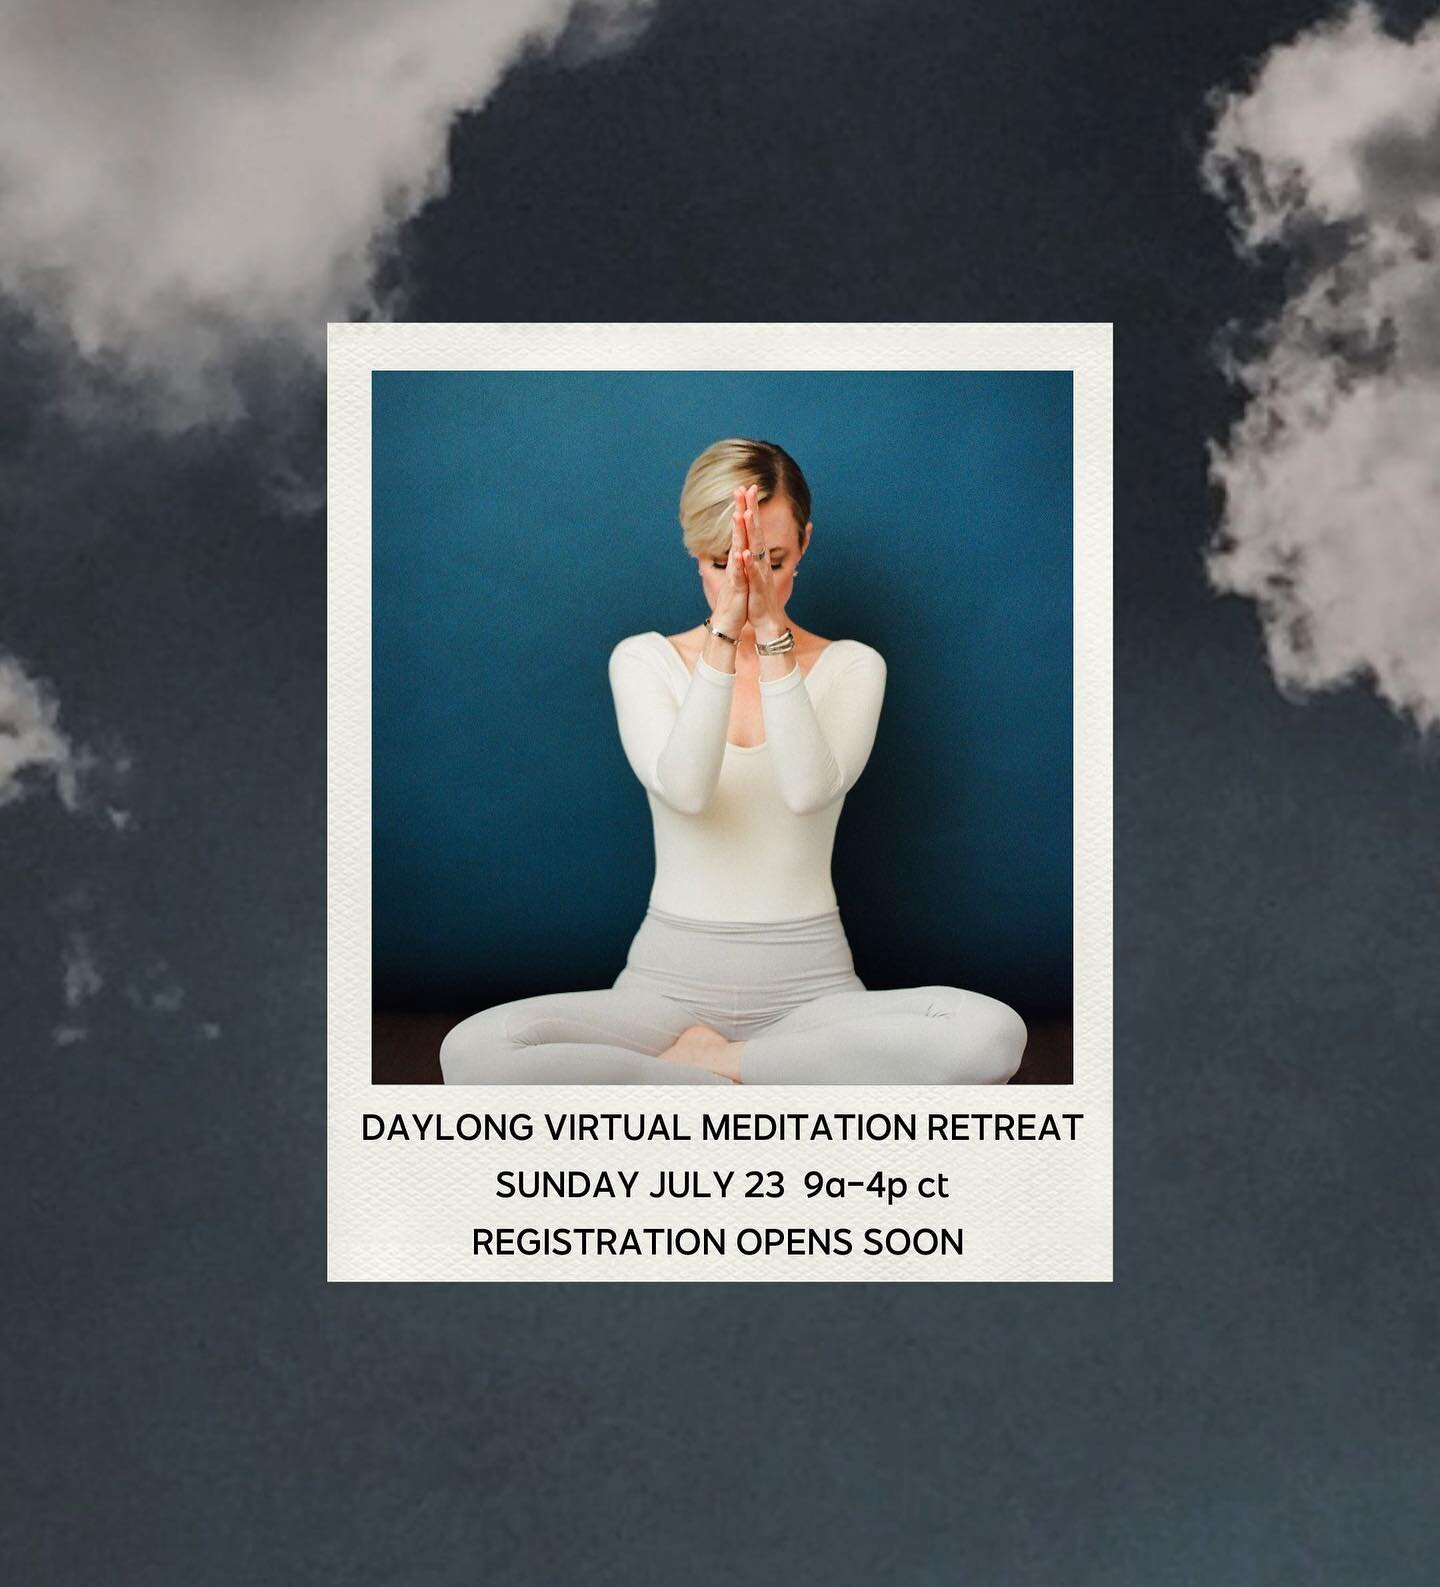 A mid-summer daylong meditation retreat // Sunday, July 23 from the comfort of your home 🥰

Public registration opens soon. 

Daily Well members keep an eye 👁️ on your inbox tomorrow for your free registration link!